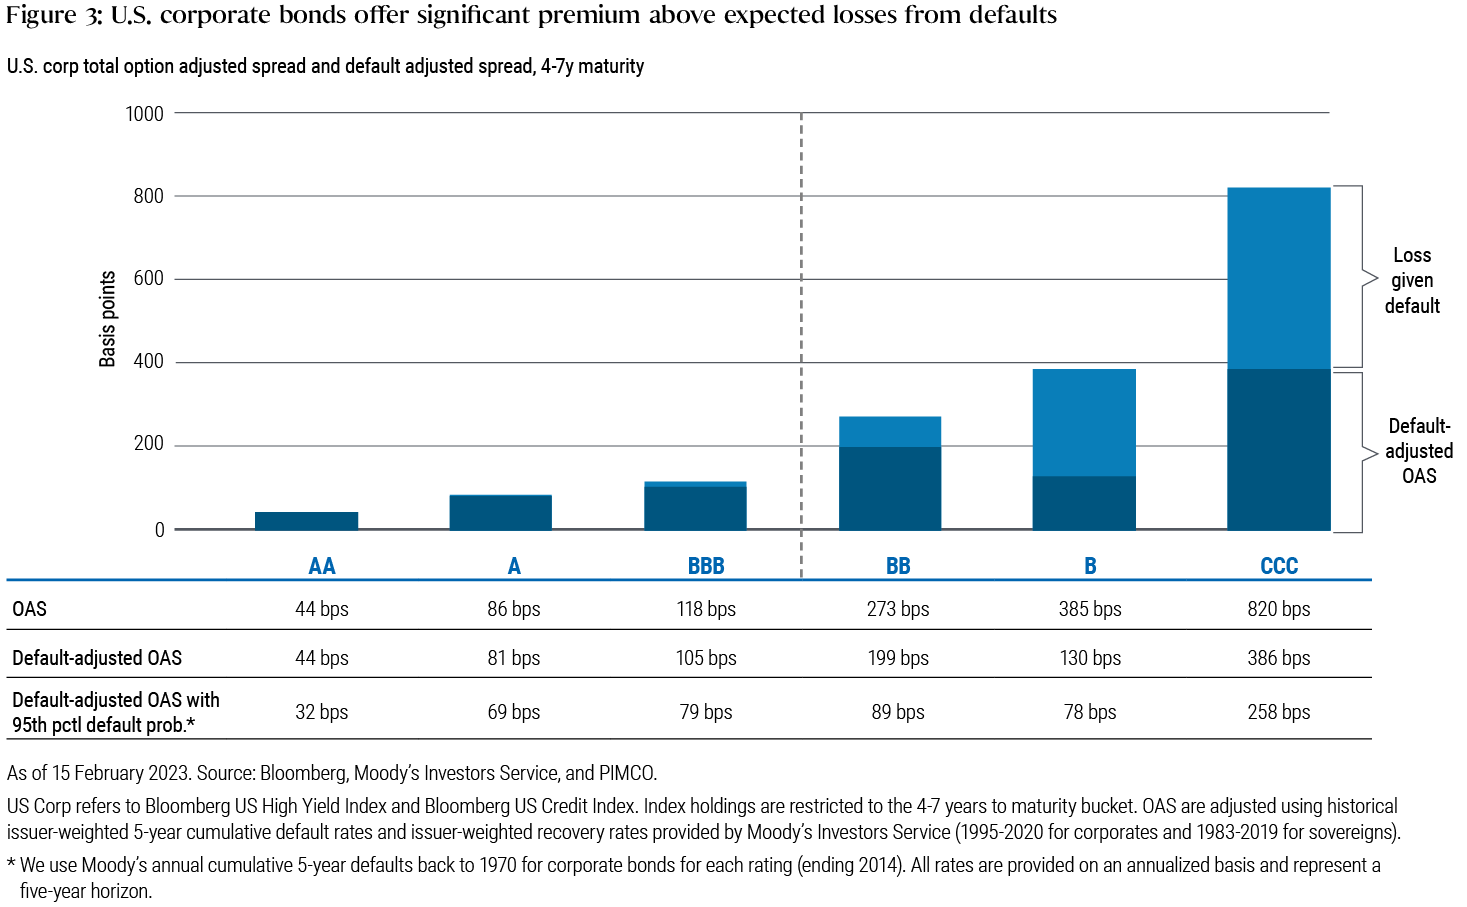 This bar chart and table shows the spreads for US corporate bonds (4-7 year maturity) for credit ratings ranging from AA to CCC. AA rated US corporate bonds provide a total option adjusted spread and default-adjusted spread of 44 bps. For CCC rated bonds, the total option adjusted spread is 820 bps and the default-adjusted spread is 386 bps. This shows that there is a material credit risk premium because expected default loss can only explain a small portion of the credit spread.